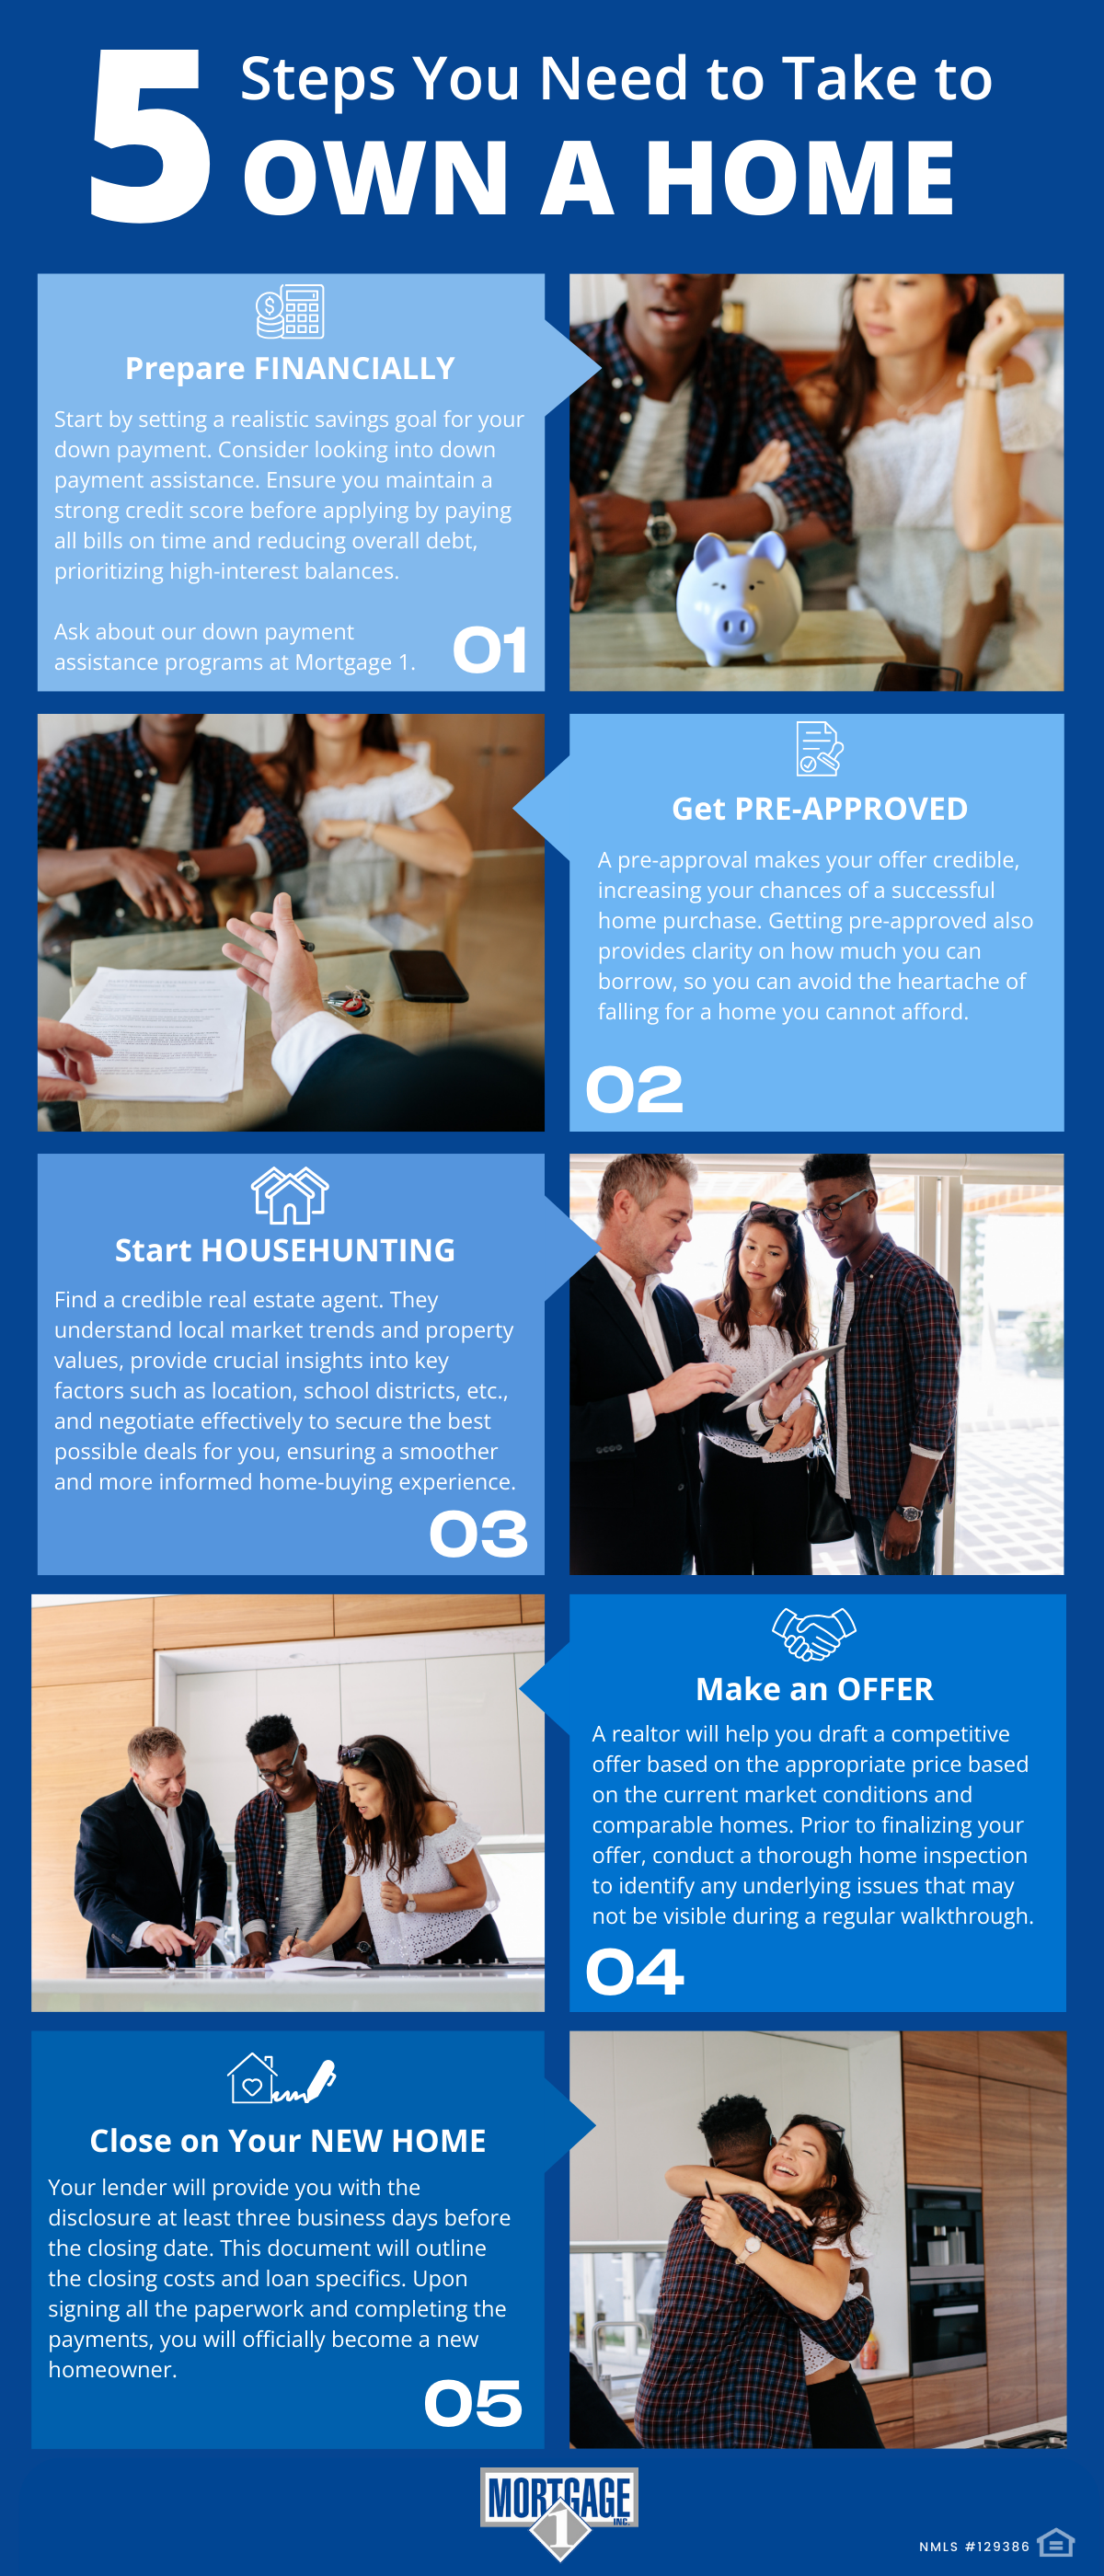 What Steps Do You Need to Take to Own a Home infographic